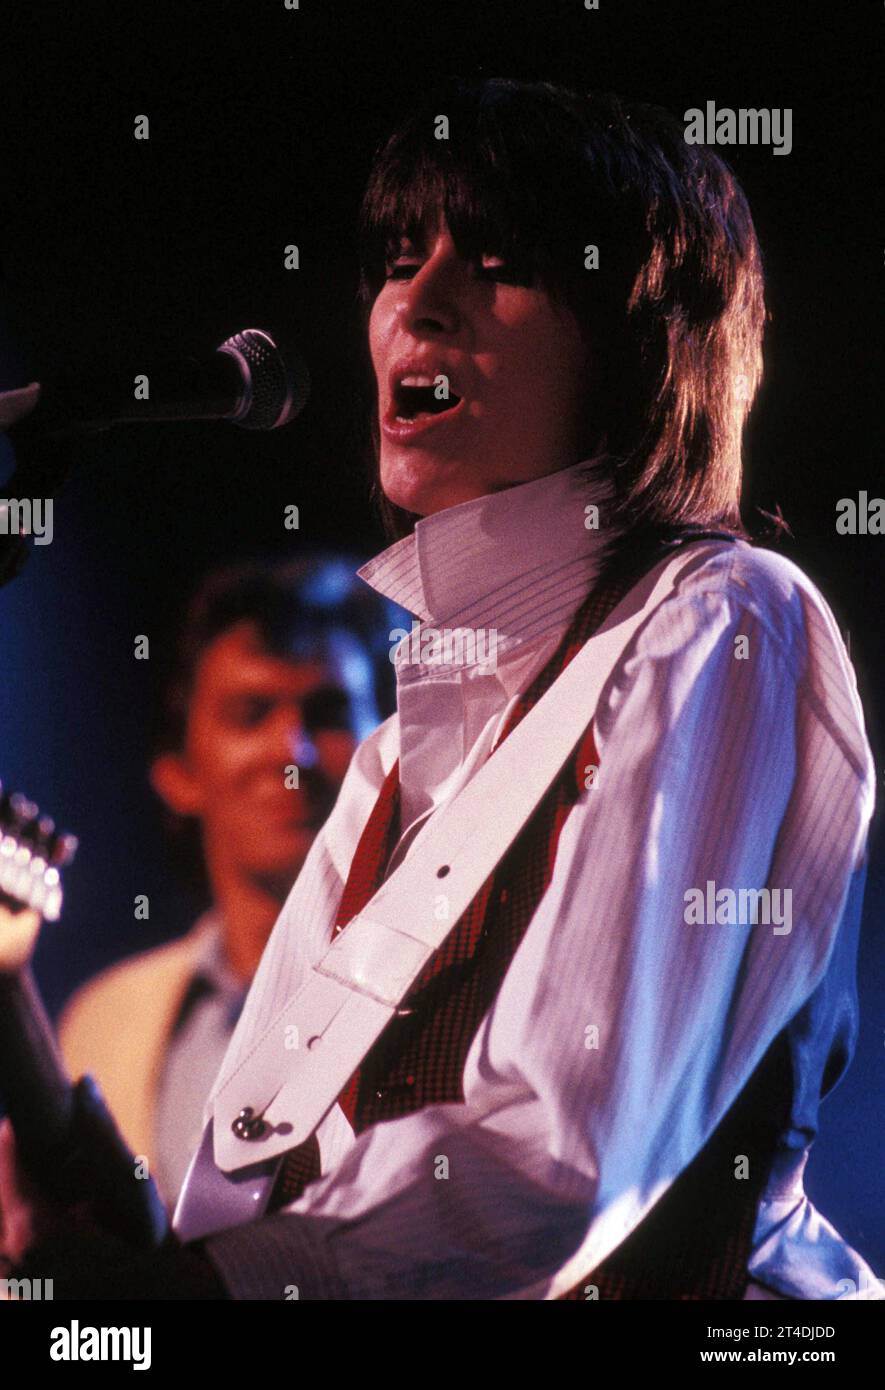 CHRISSIE HYNDE ;(born 7 September 1951) ; American-British musician ; She is a founding member and the lead vocalist, guitarist, and primary songwriter of the rock band the Pretenders ;  Credit: Lynn Mcafee / Performing Arts Images www.performingartsimages.com Stock Photo